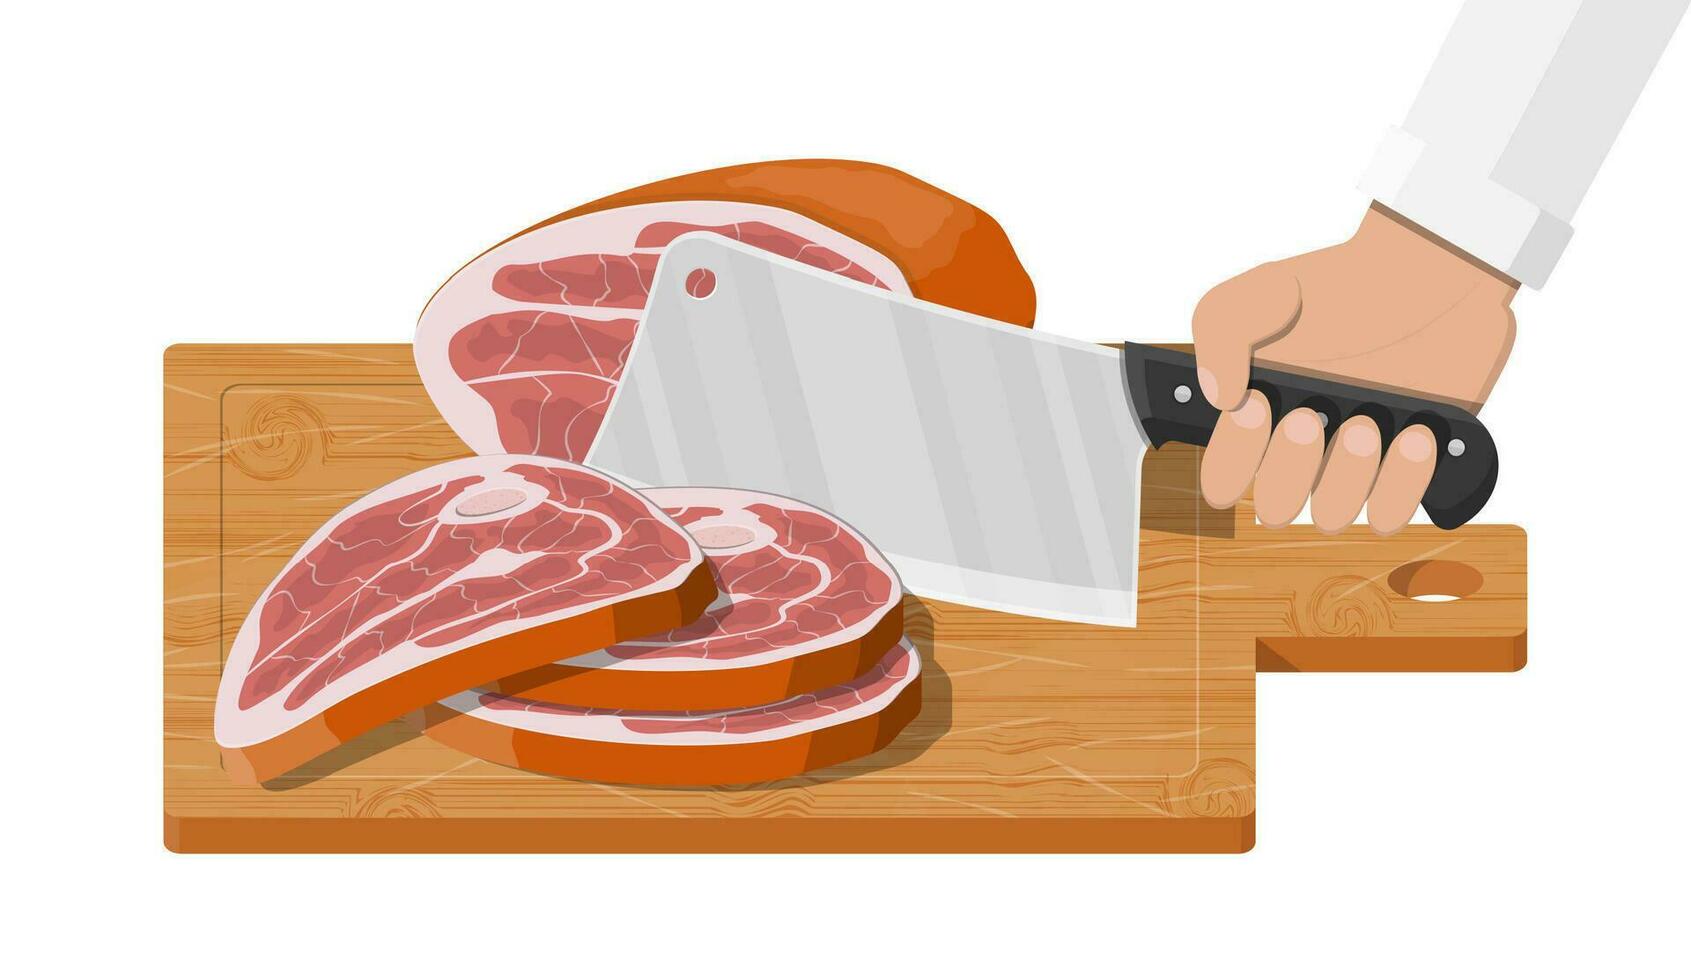 Meat steak chopped on wooden board with kitchen knife. Cutting board, butcher cleaver and piace of meat. Utensils, household cutlery. Cooking, domestic kitchenware. Vector illustration in flat style